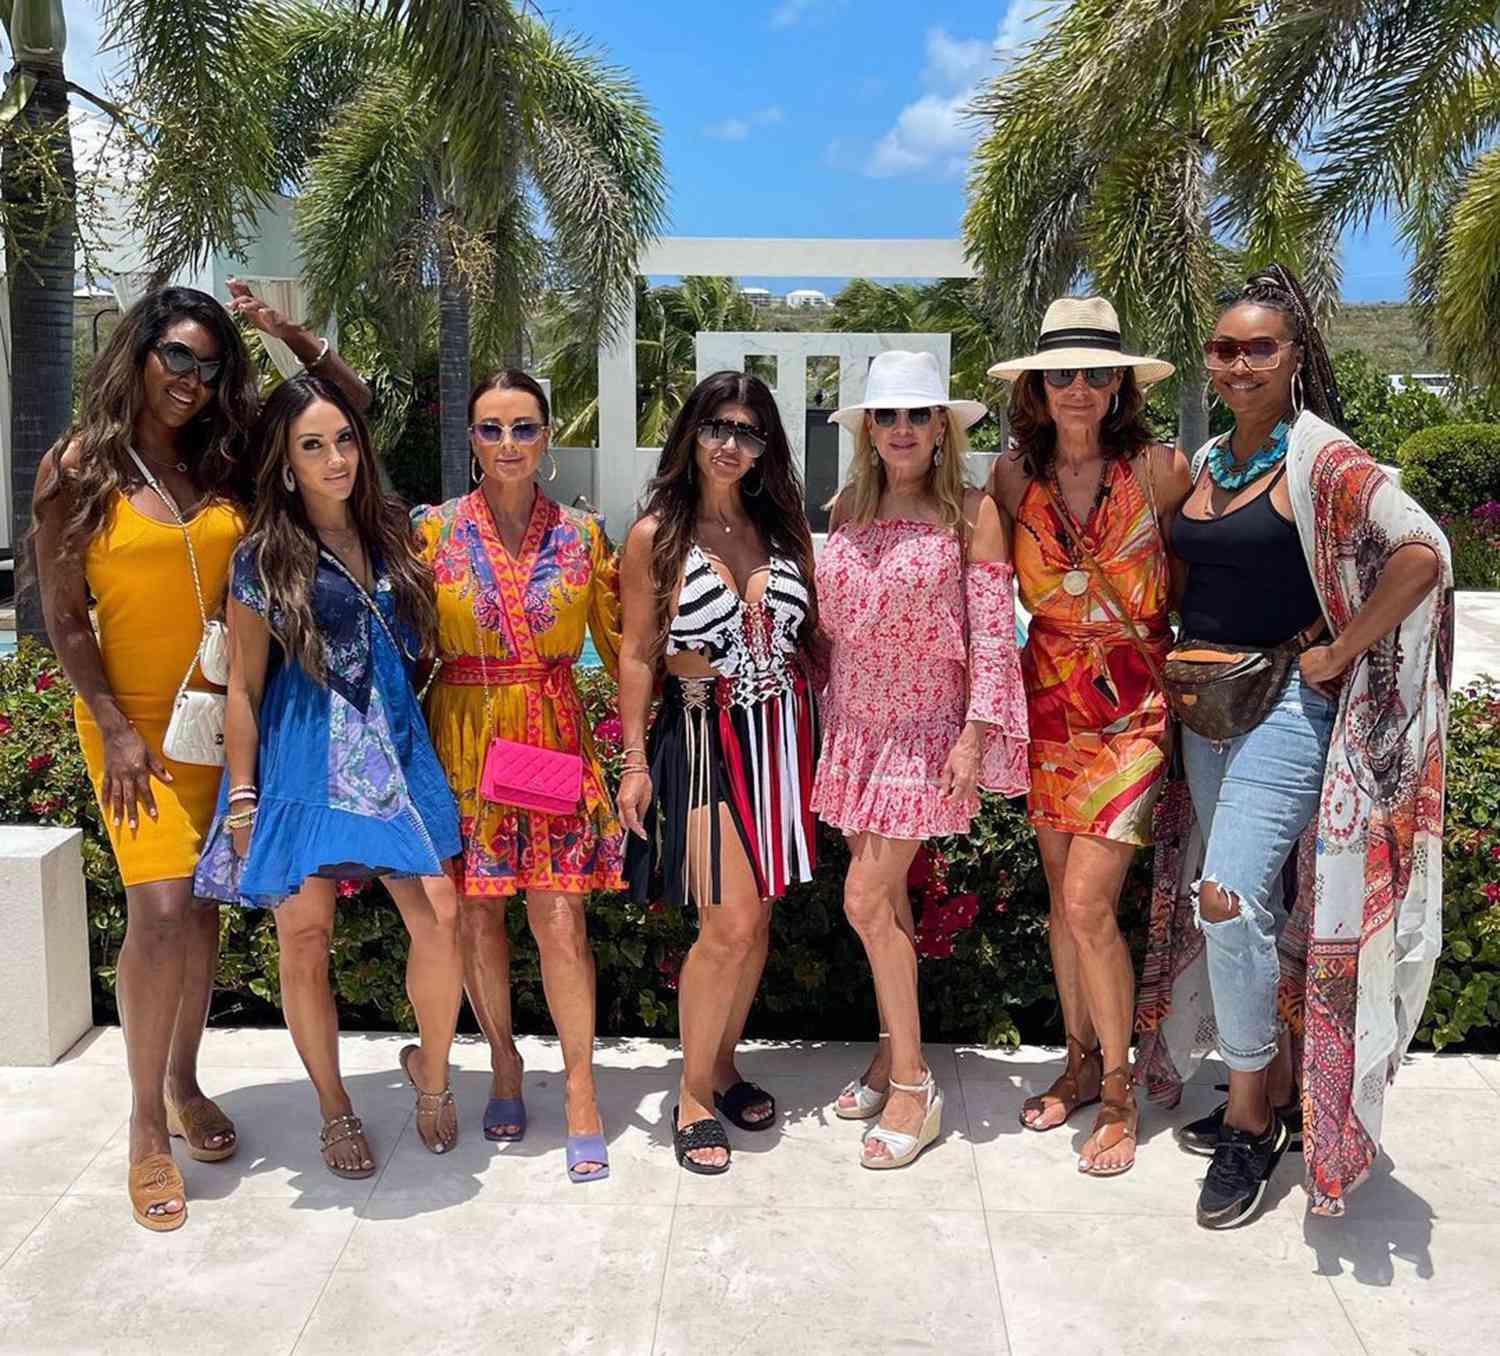 Real Housewives Ultimate Girls Trip: See Inside the Housewives' $11.5M Turks and Caicos Villa